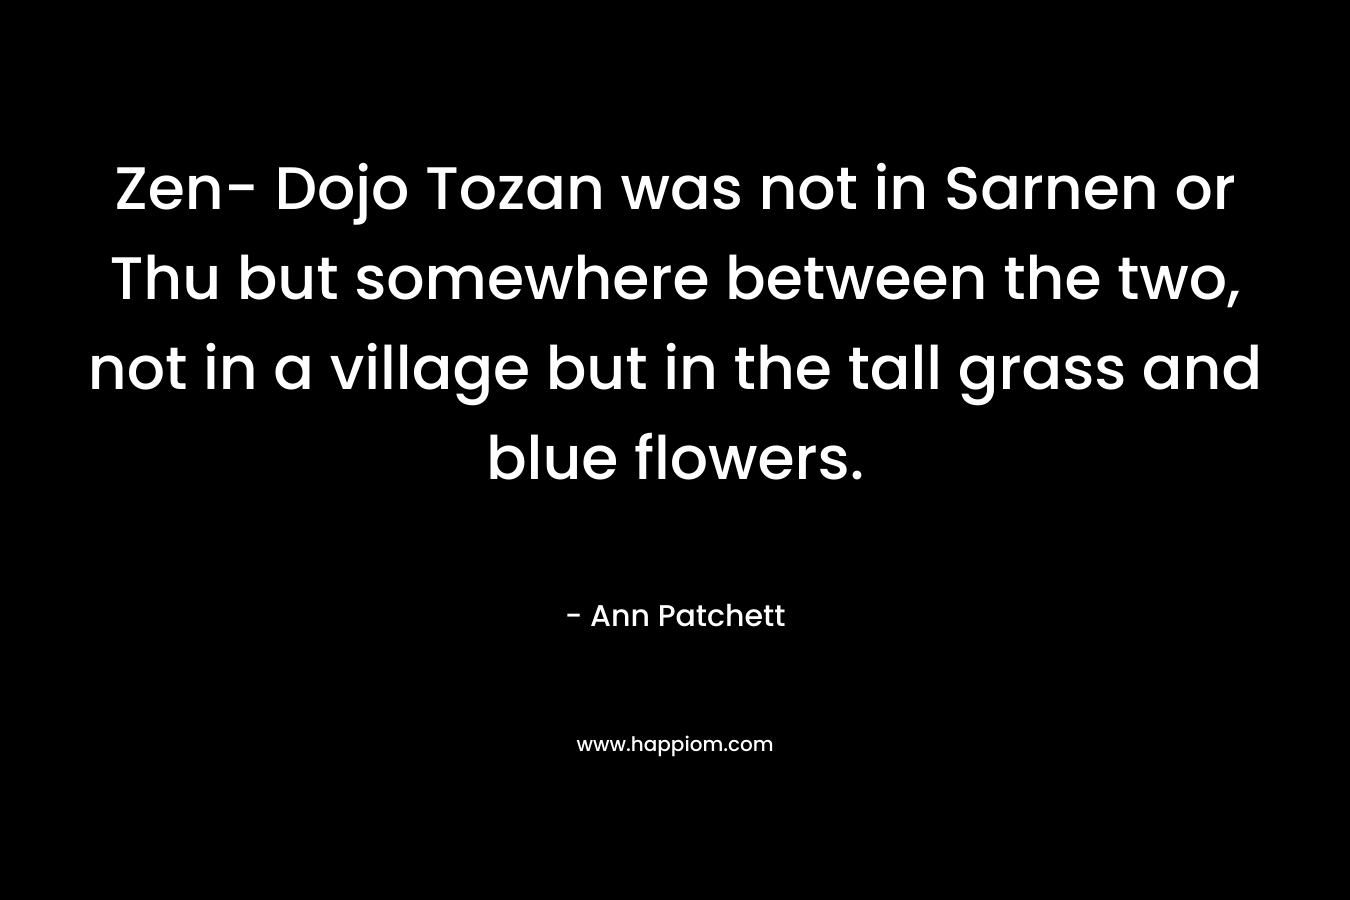 Zen- Dojo Tozan was not in Sarnen or Thu but somewhere between the two, not in a village but in the tall grass and blue flowers.